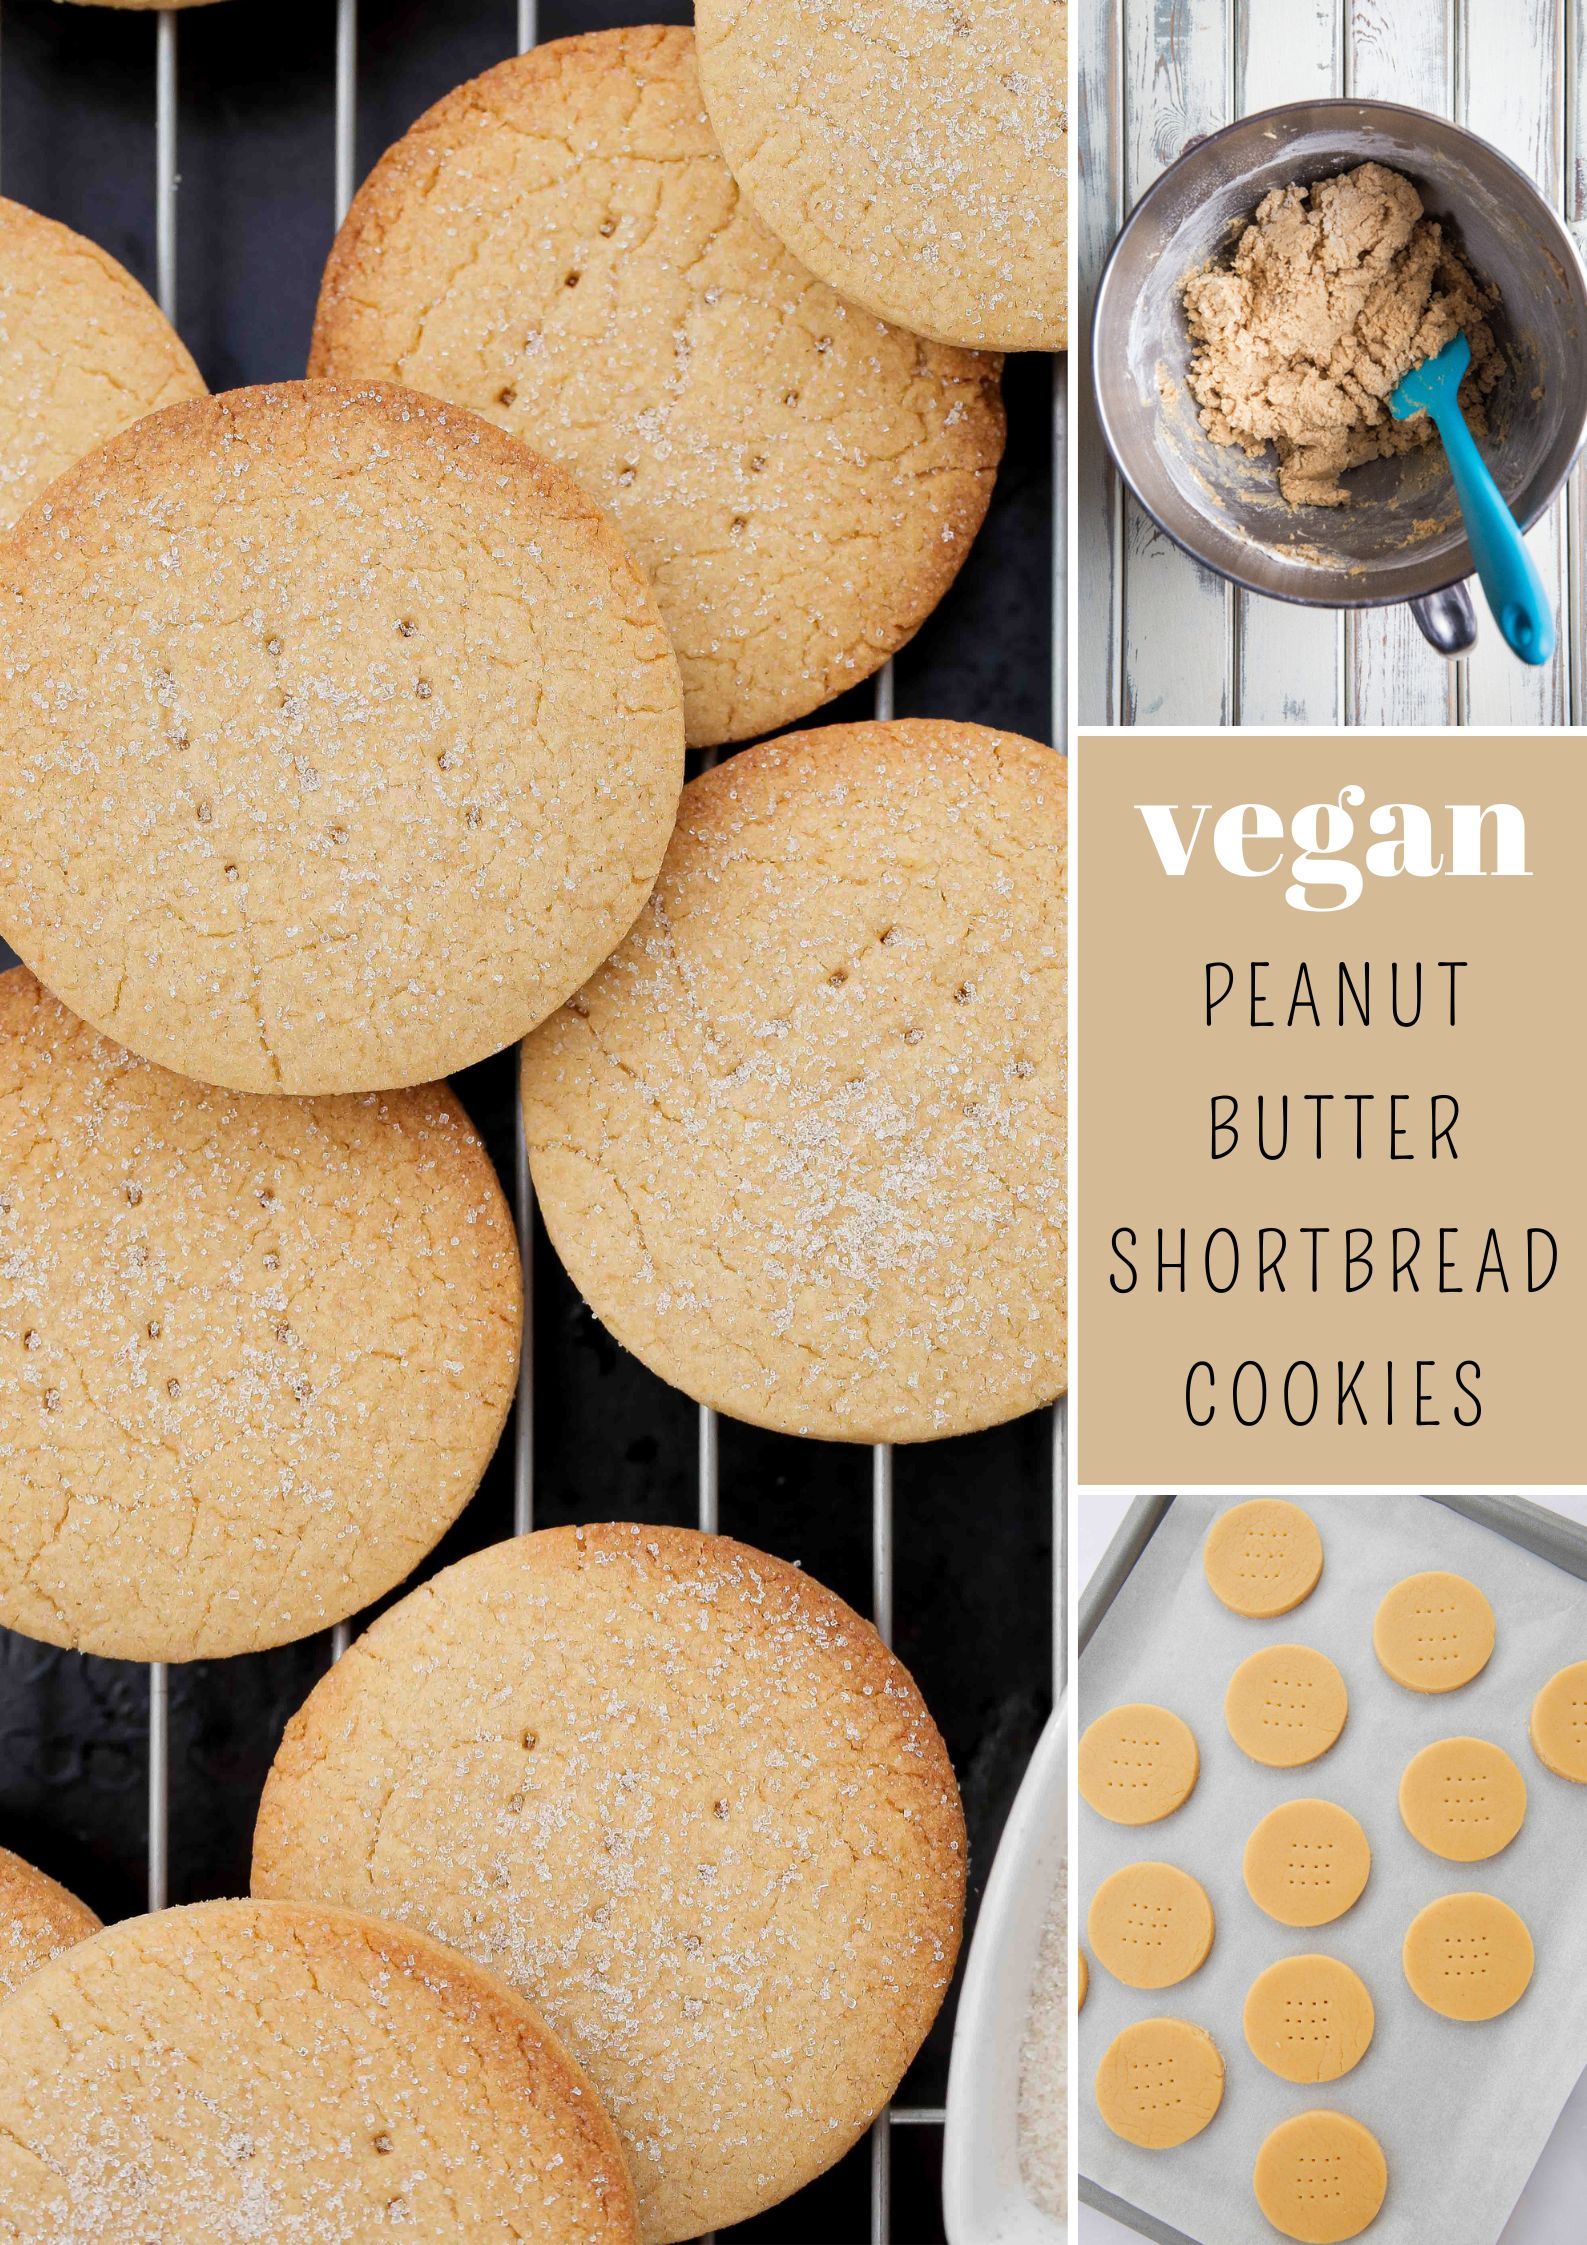 Buttery, melt in the mouth vegan peanut butter shortbread cookies made with just 4 ingredients! Recipe on thecookandhim.com #veganbaking #veganshortbread #peanutbutterrecipes #peanutbutter #shortbreadcookies